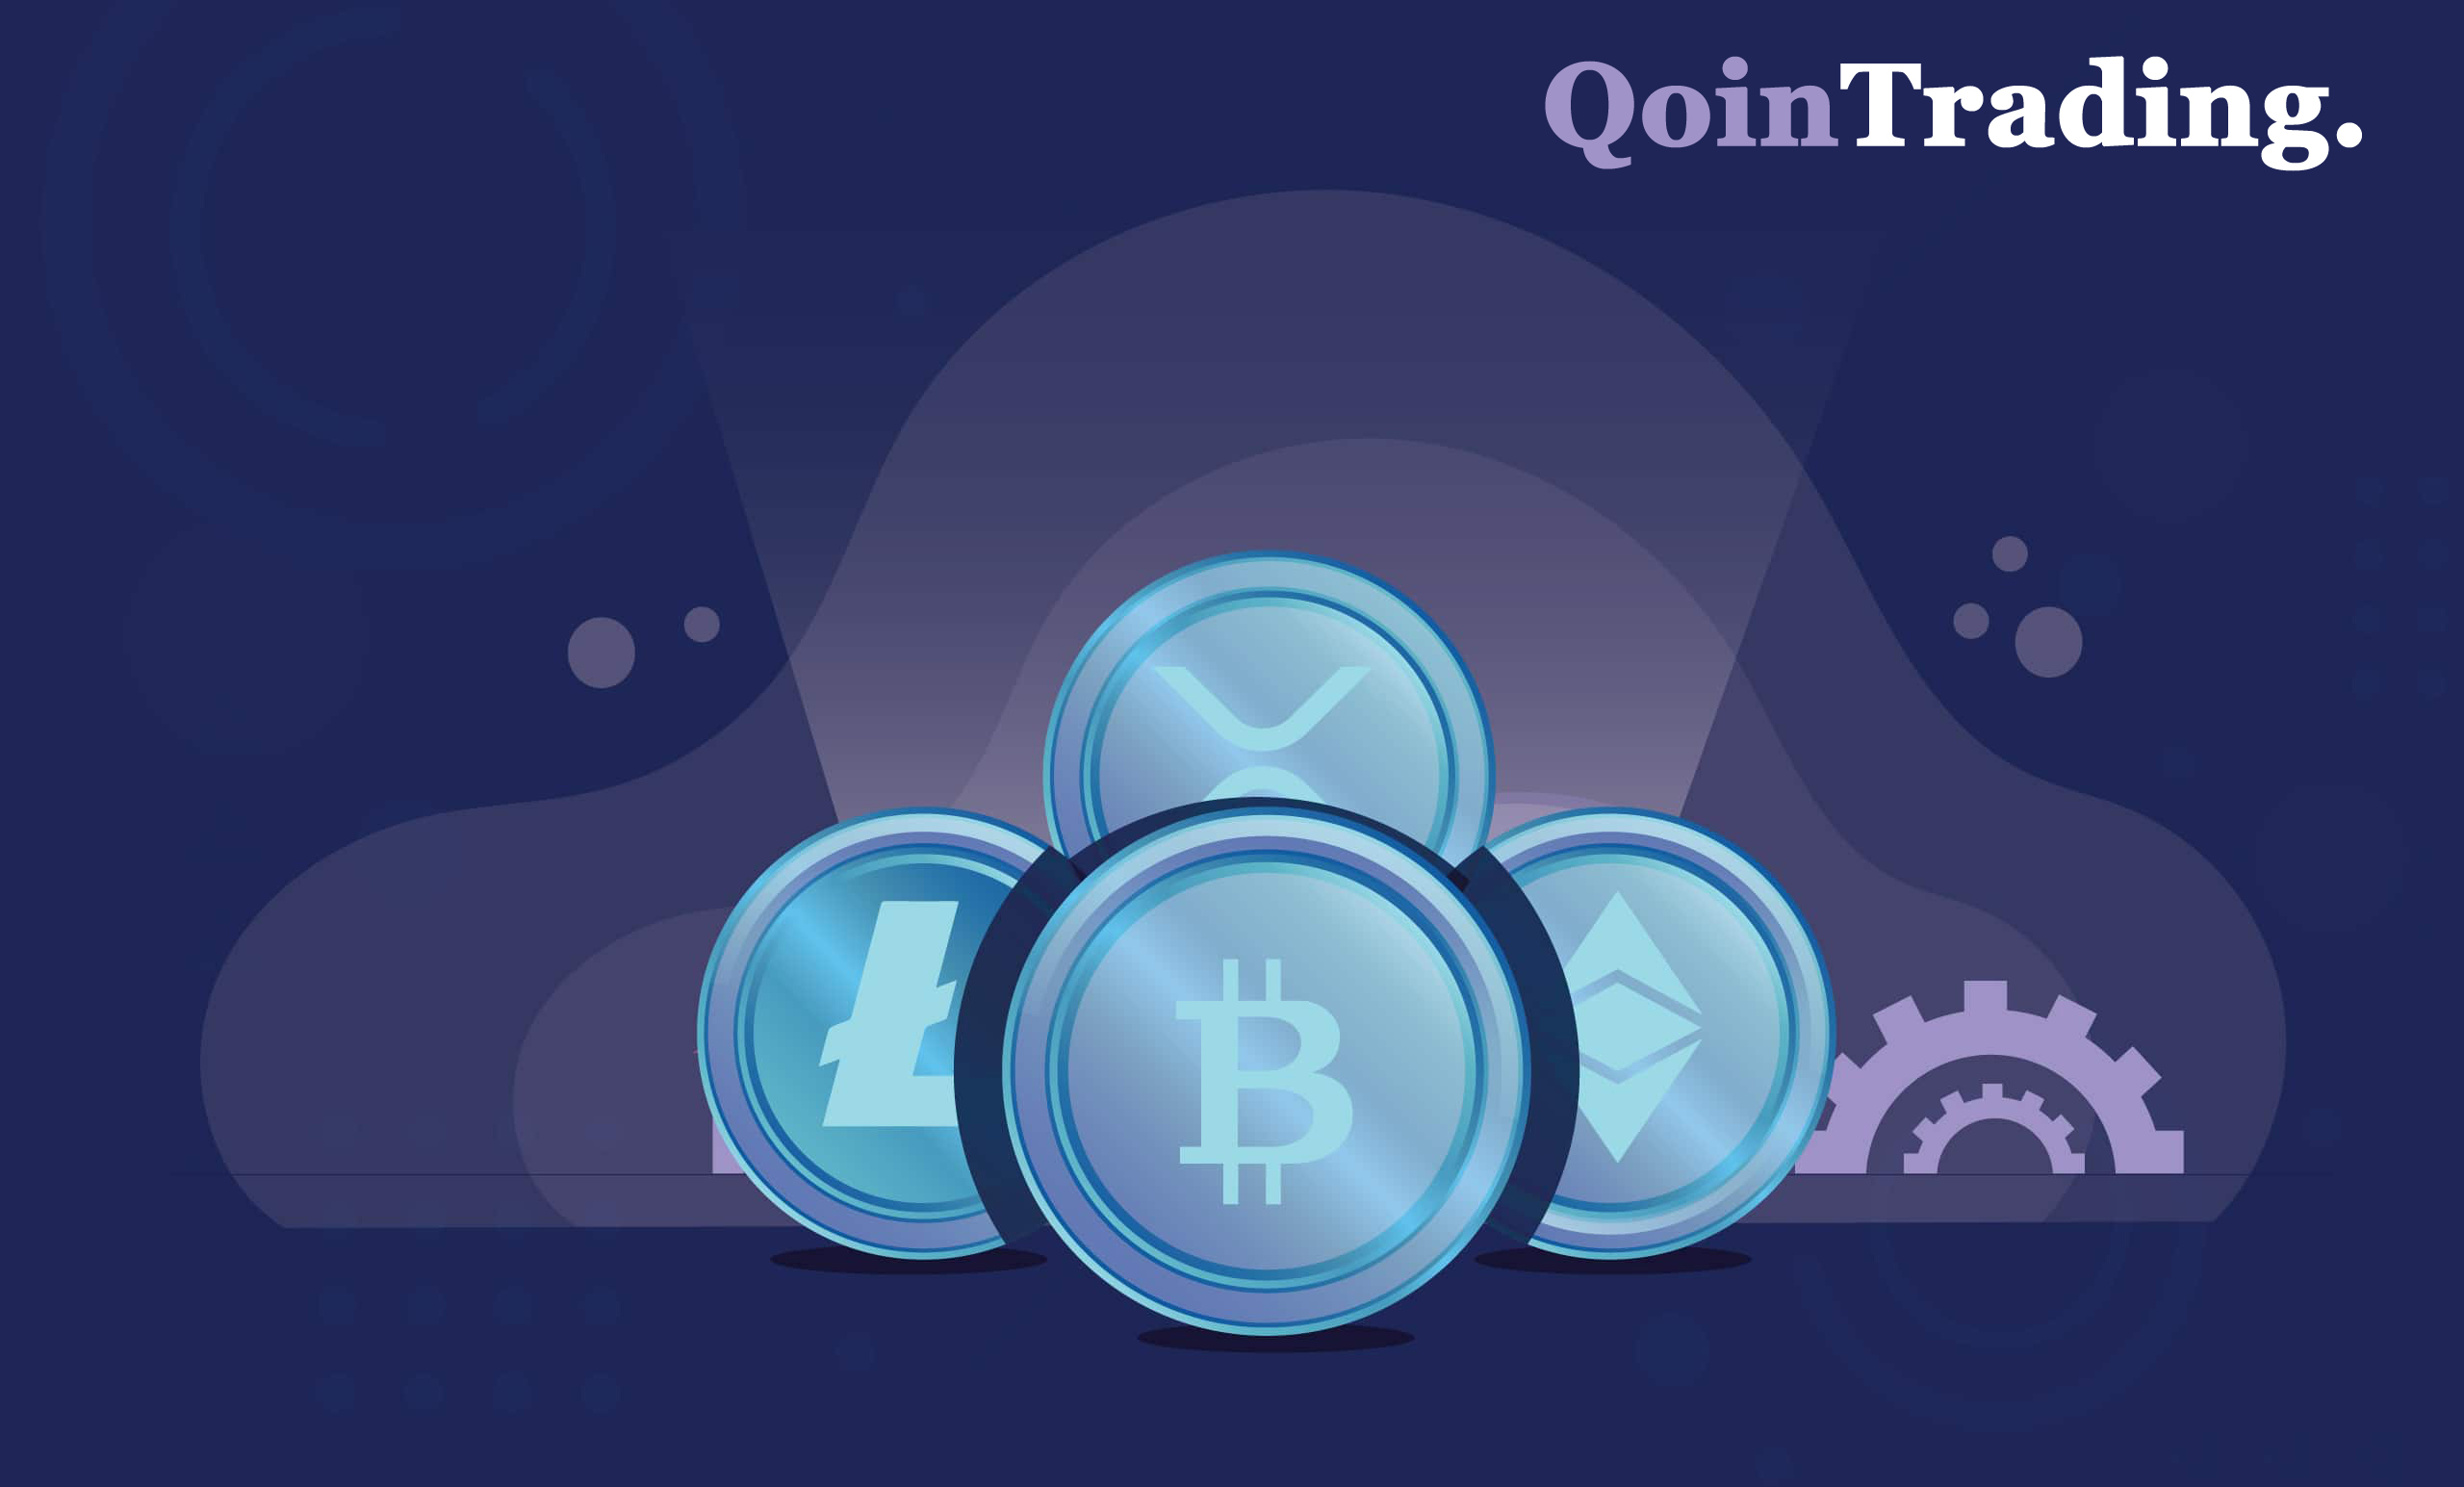 qoin-Cryptocurrency-trading.jpg